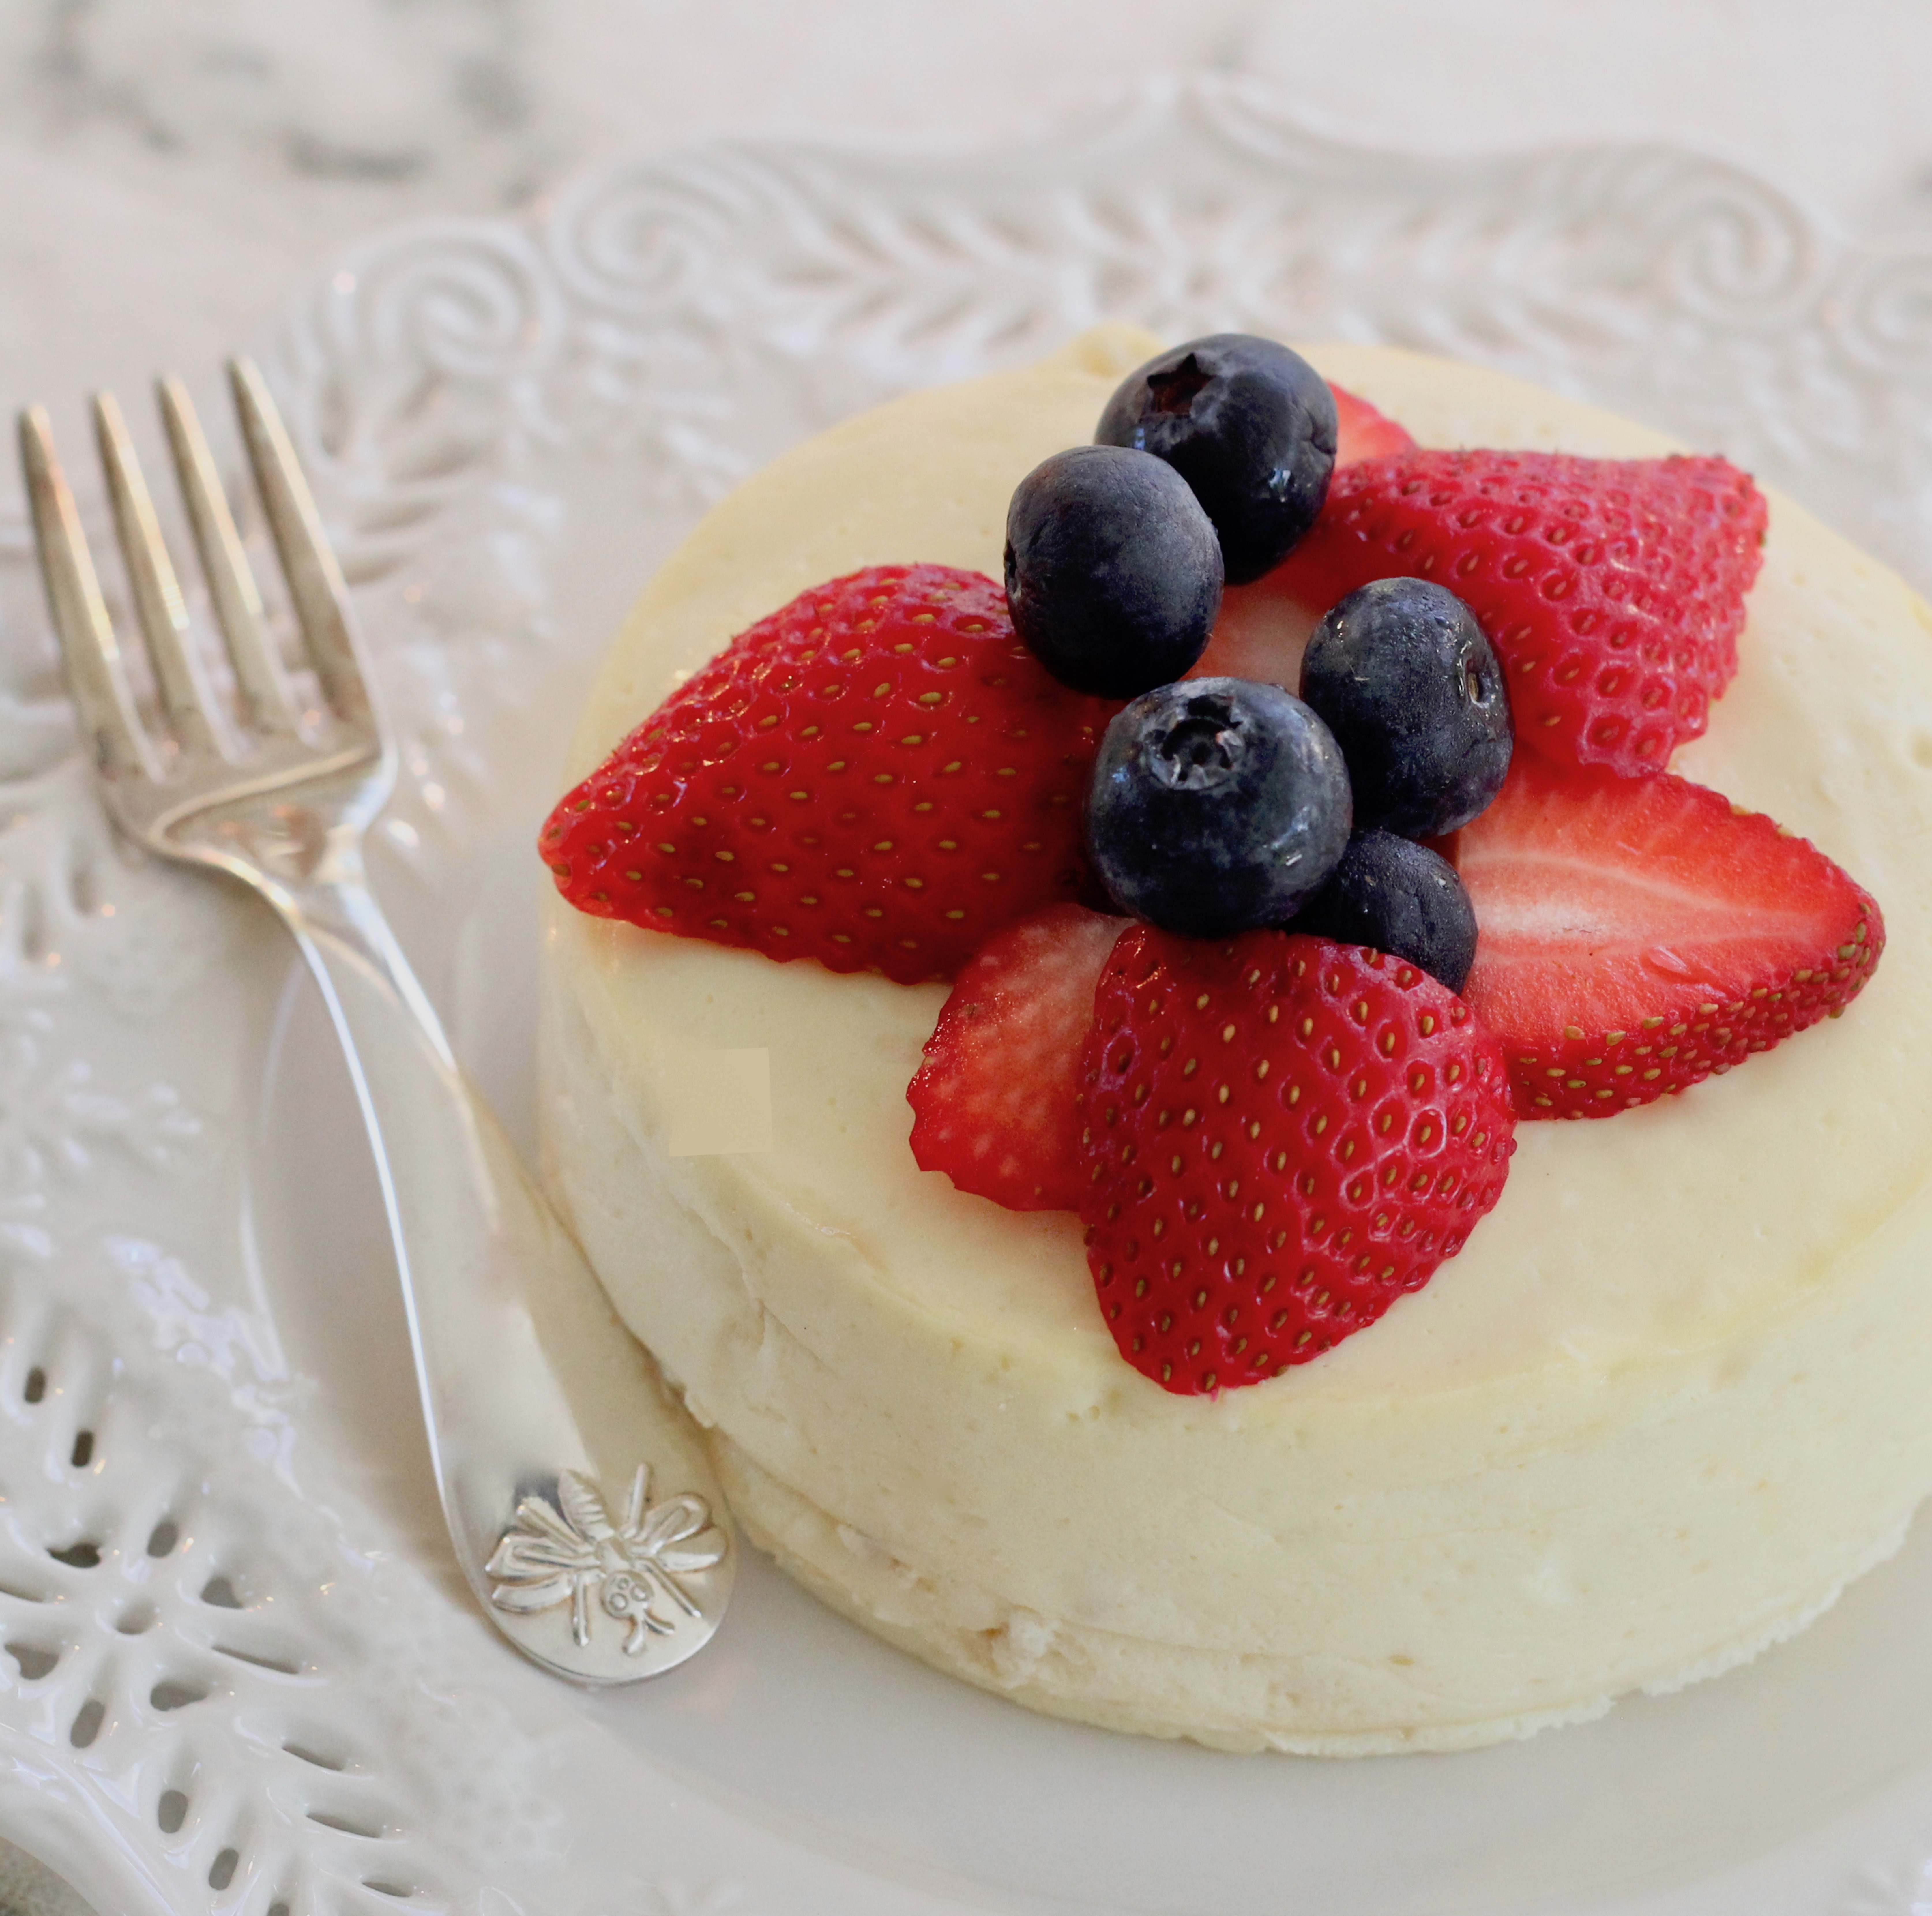 Healthier Instant Pot Cheesecake - Eating Instantly